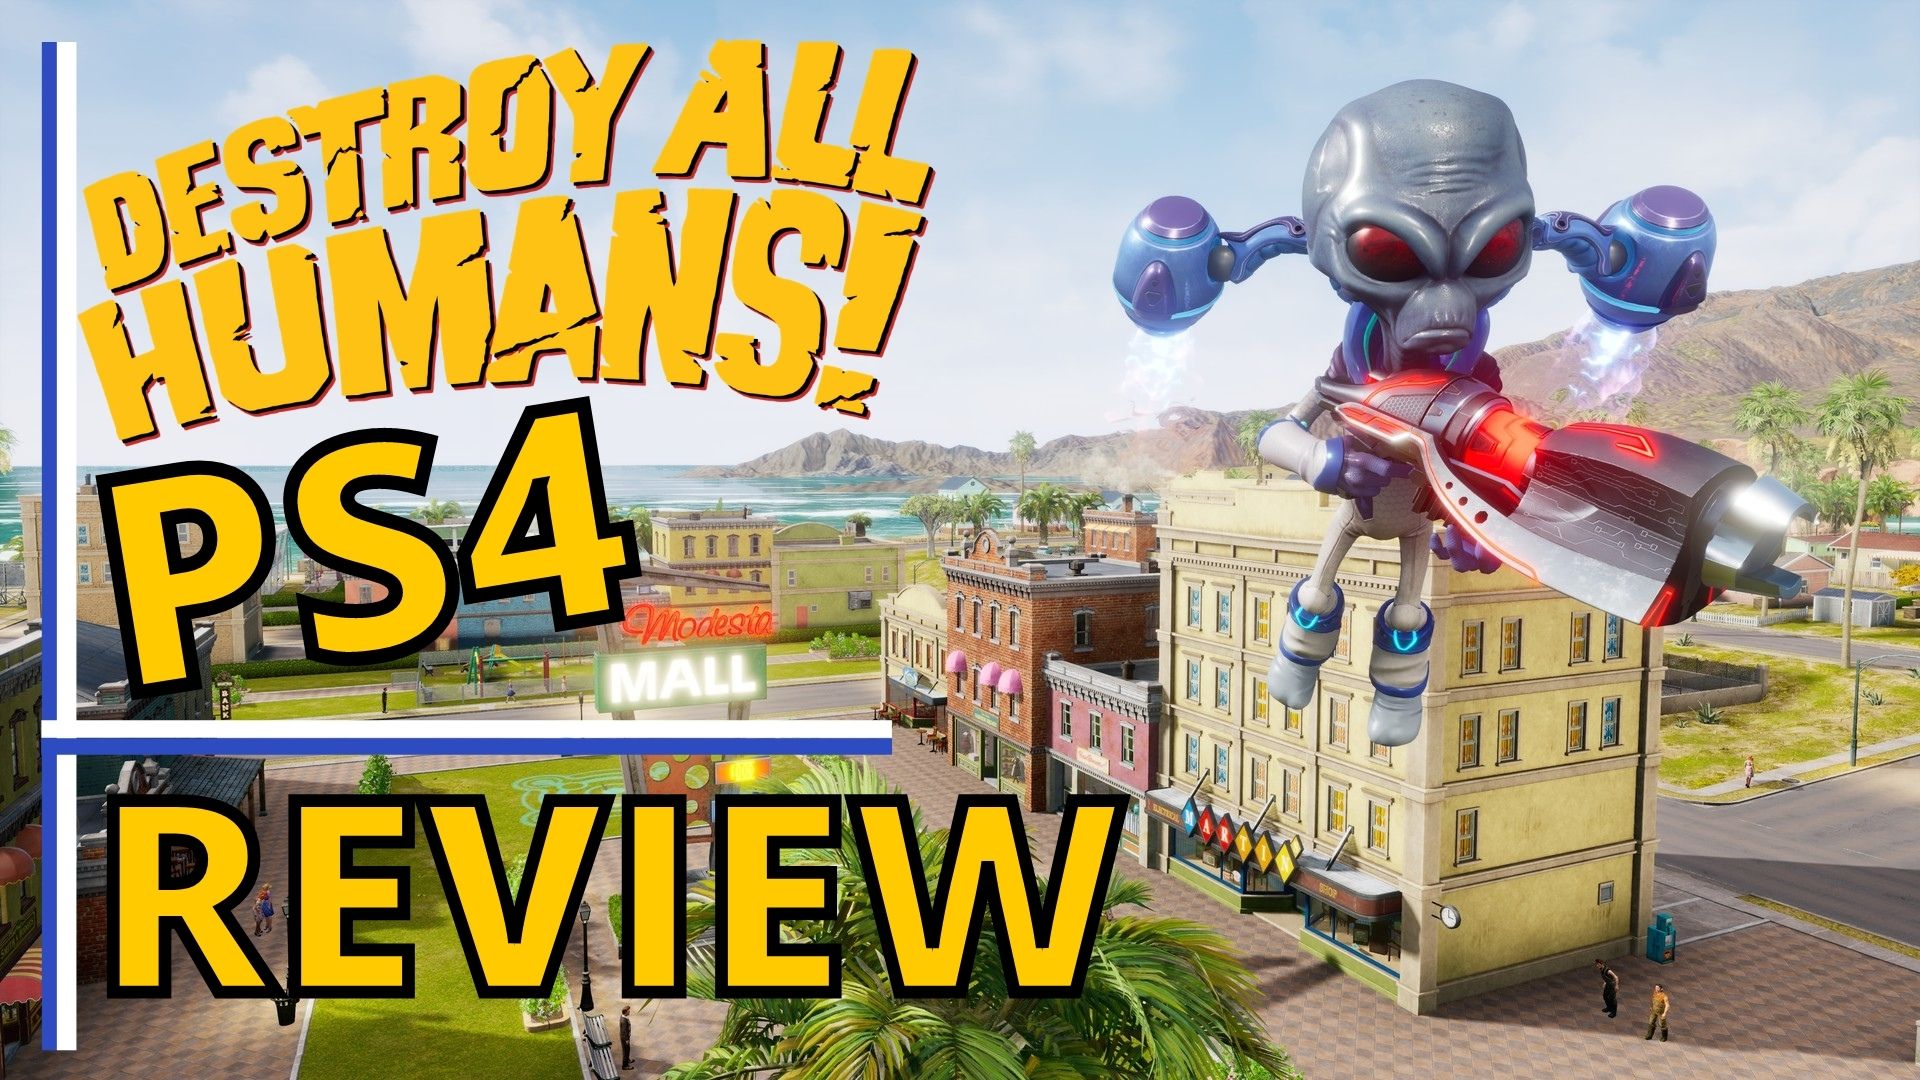 Review: Destroy All Humans - PS4